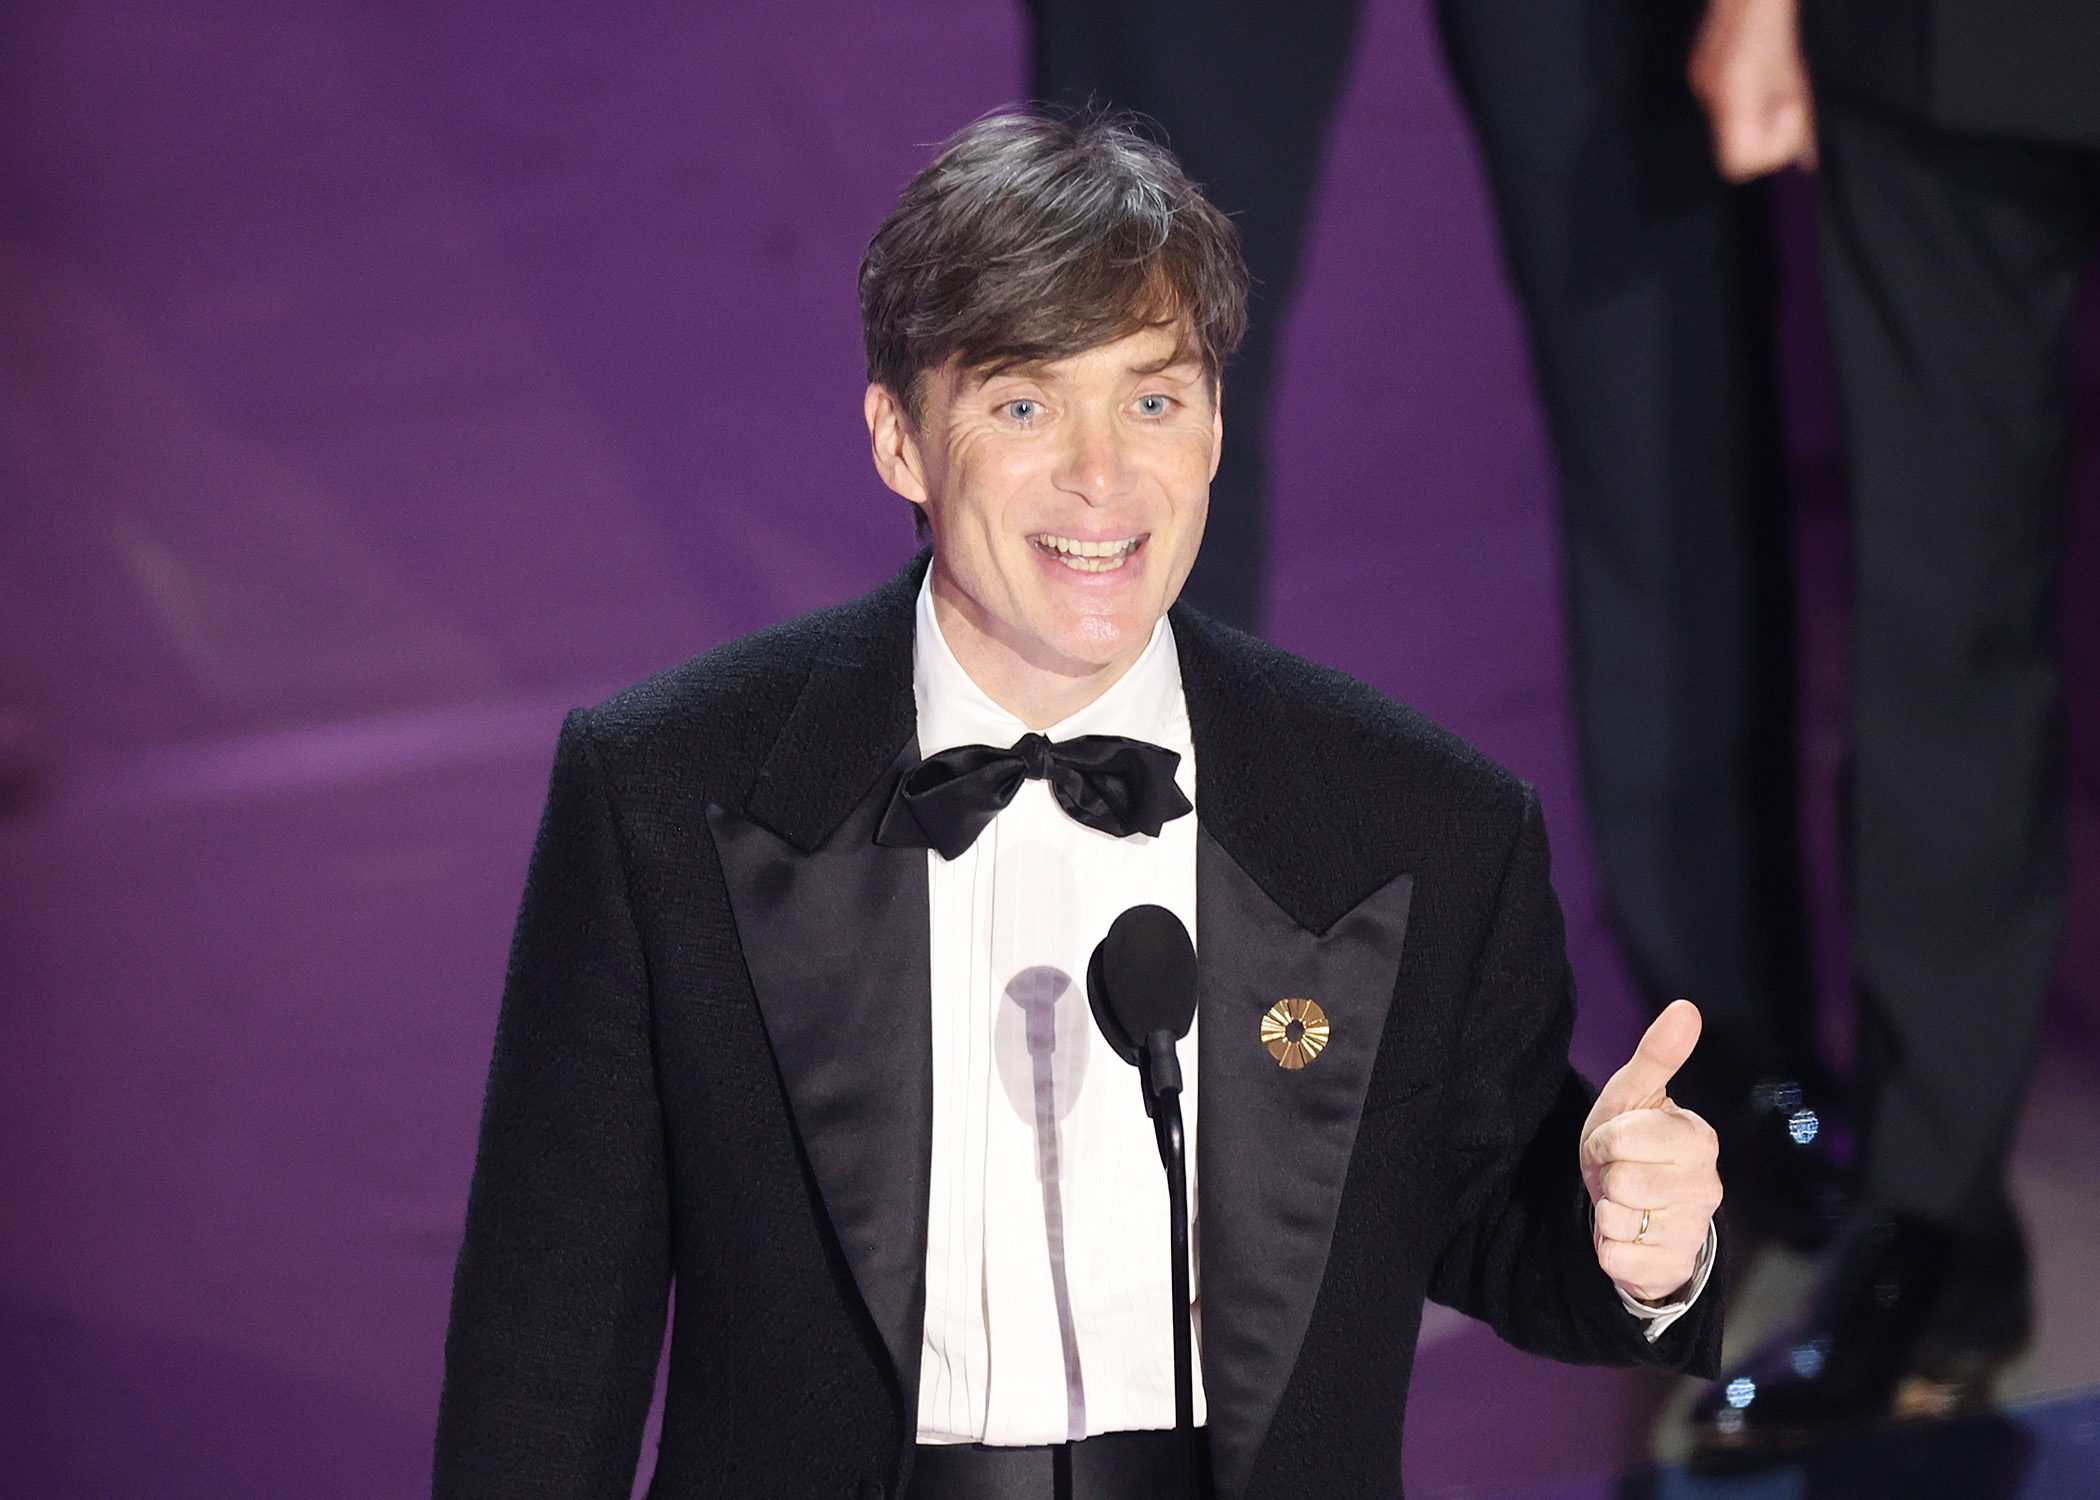 Cillian smiling onstasge in a tuxedo with a bow tie giving a thumbs-up